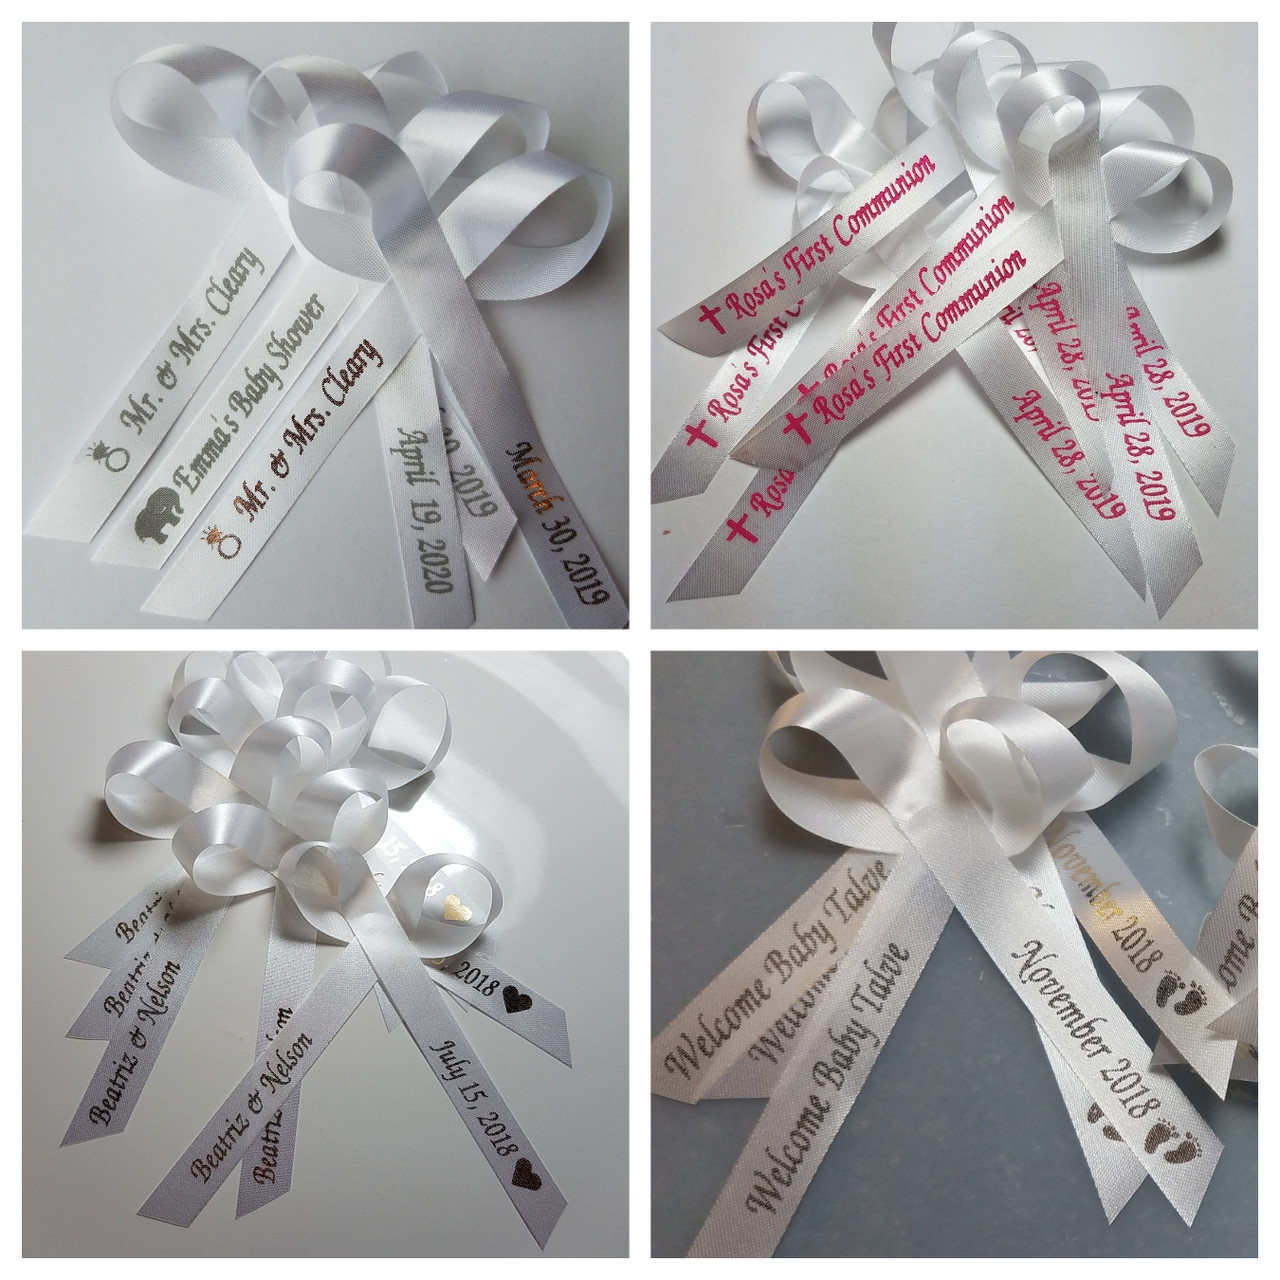  25 Personalized Ribbons Custom Bridal Shower Favor Party Favors  Wedding Bridesmaid Memorial Ribbons Funeral Baby Shower Invitations Mis XV  años Quinceanera Satin Ribbons (Fuchsia Ribbon) : Home & Kitchen